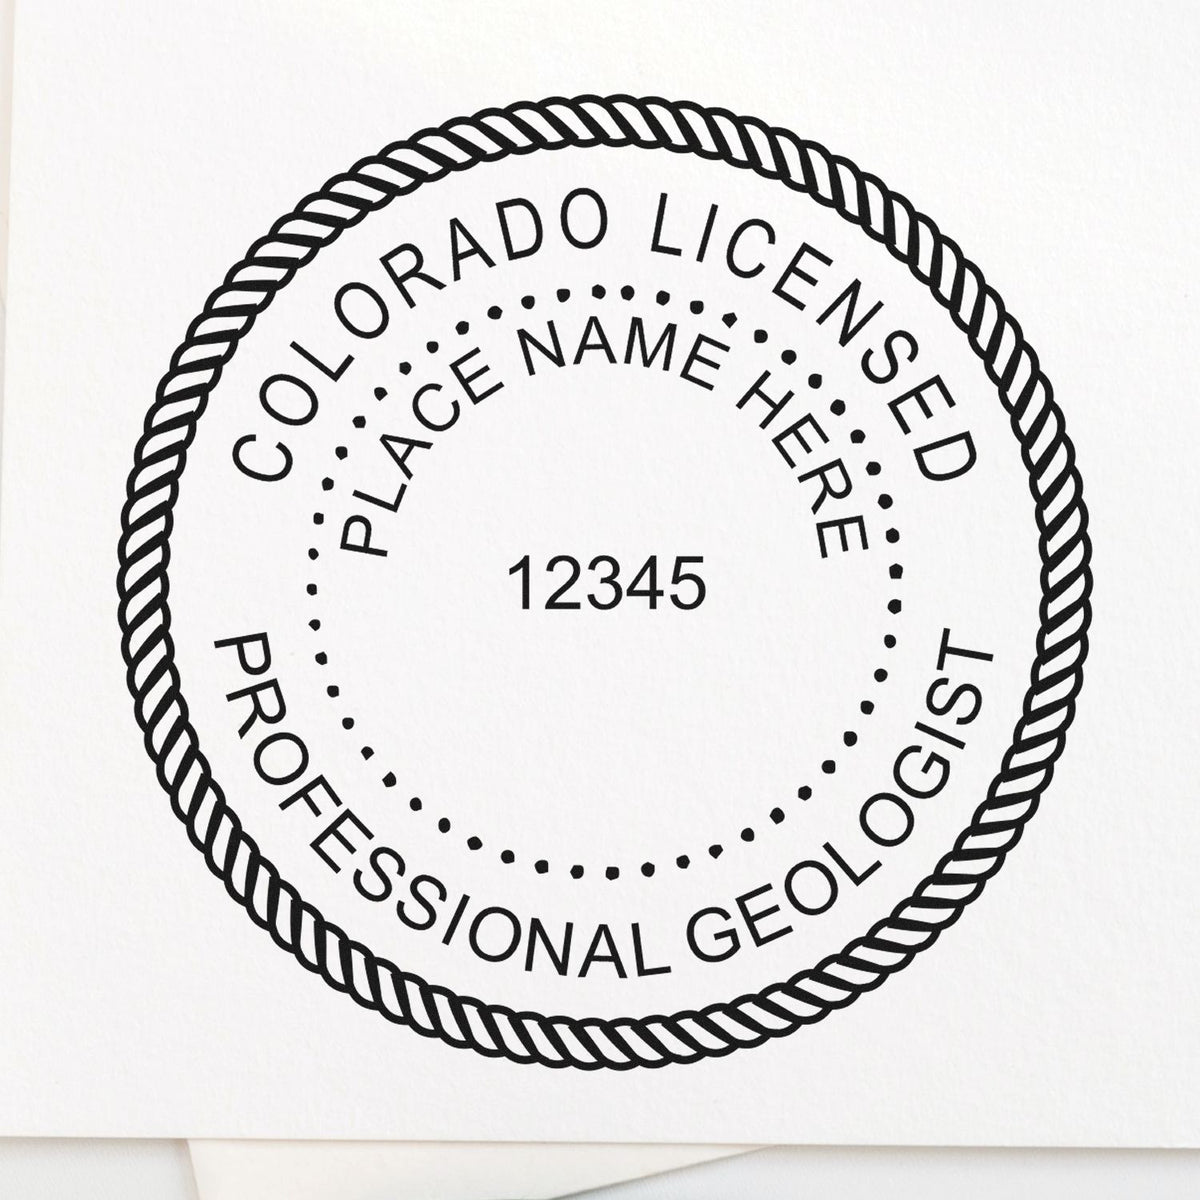 A photograph of the Slim Pre-Inked Colorado Professional Geologist Seal Stamp  impression reveals a vivid, professional image of the on paper.